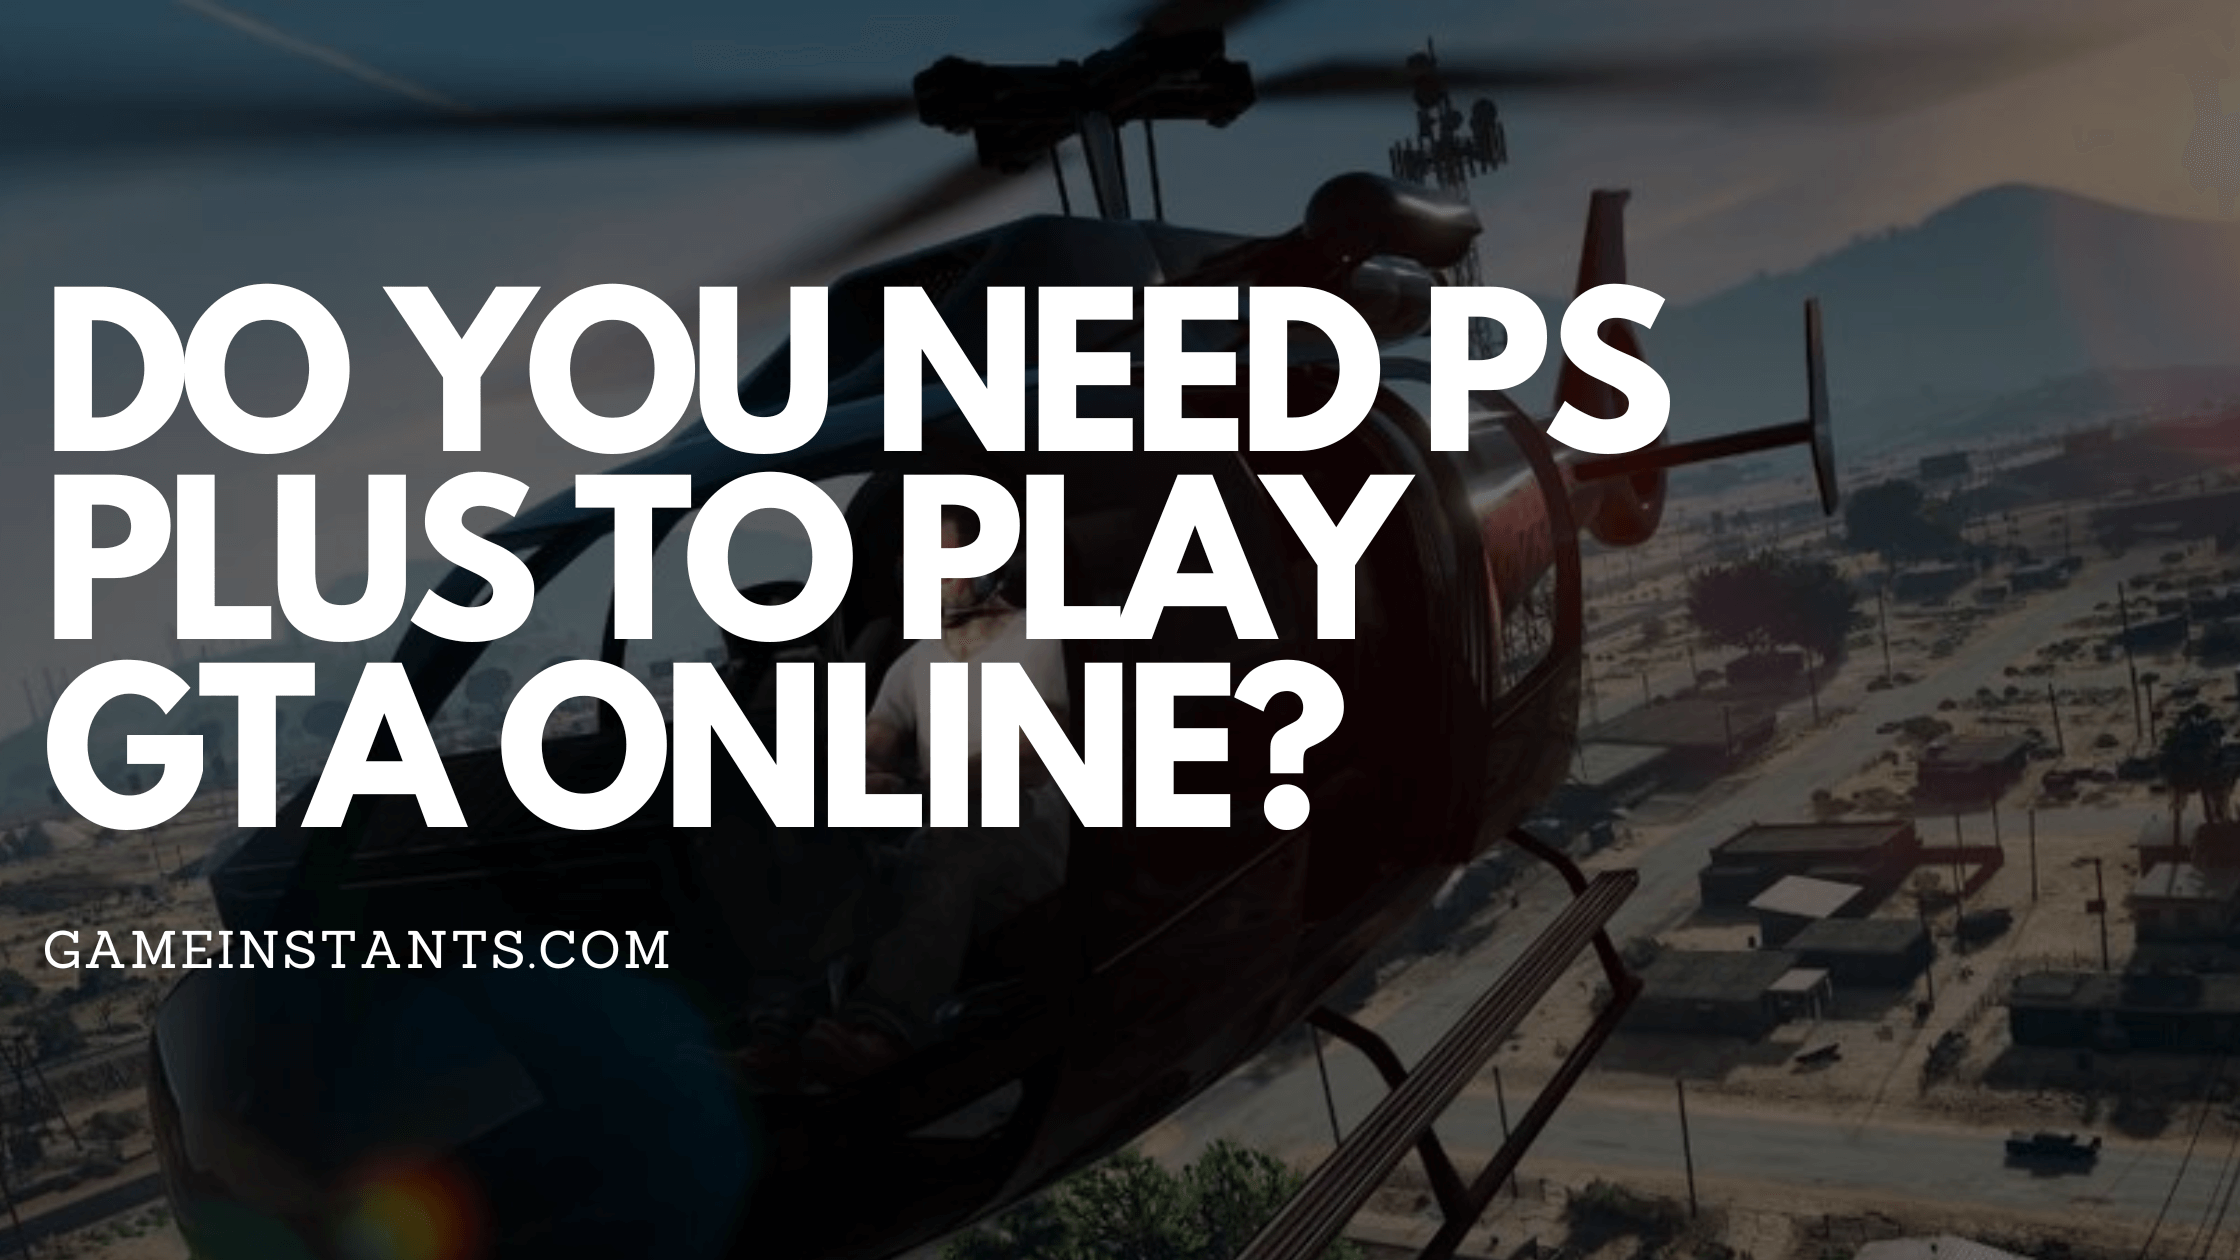 Do you need PS Plus to Play GTA Online